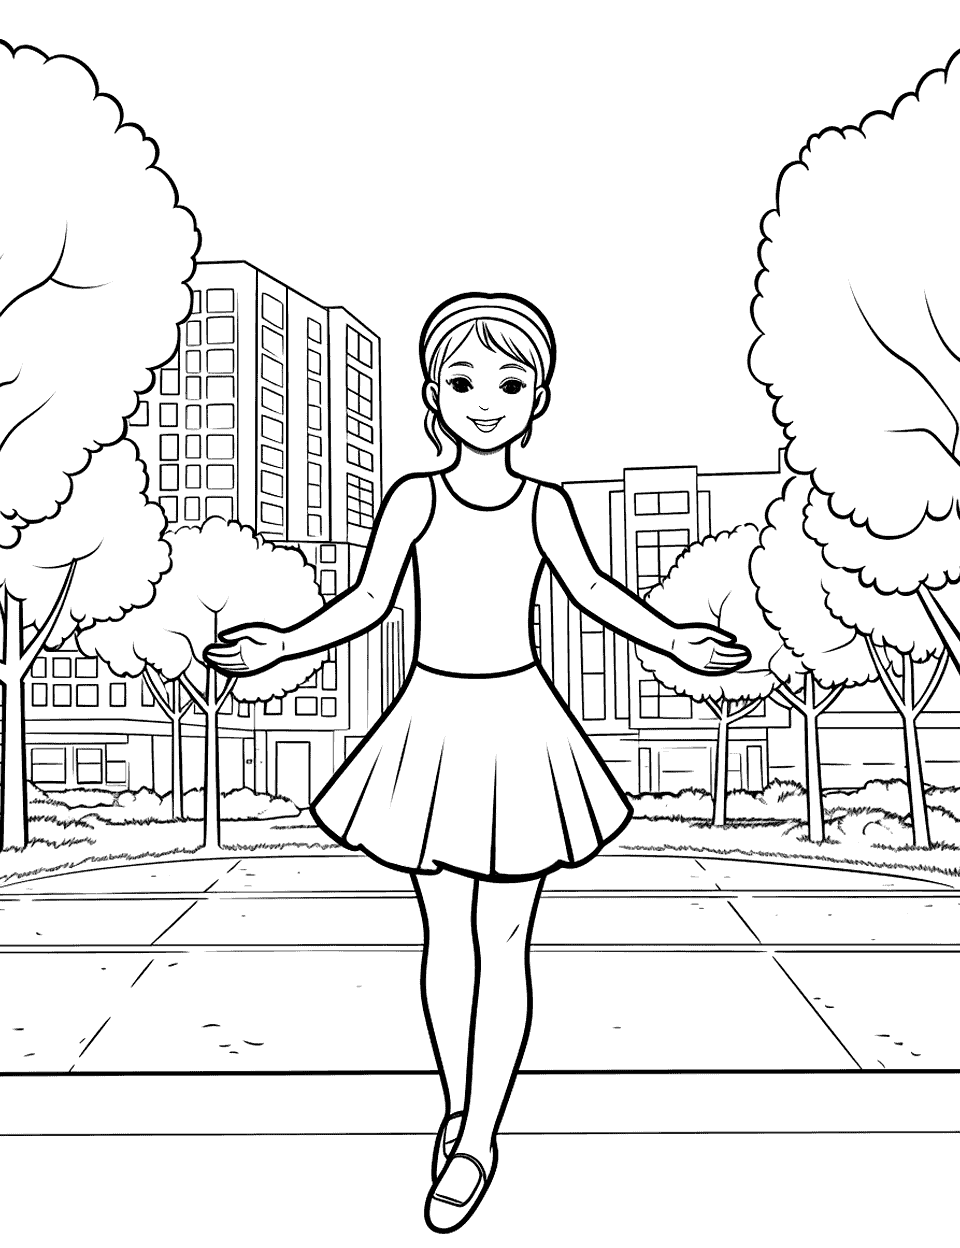 Ballet in the Park Ballerina Coloring Page - A ballerina performing in a city park.